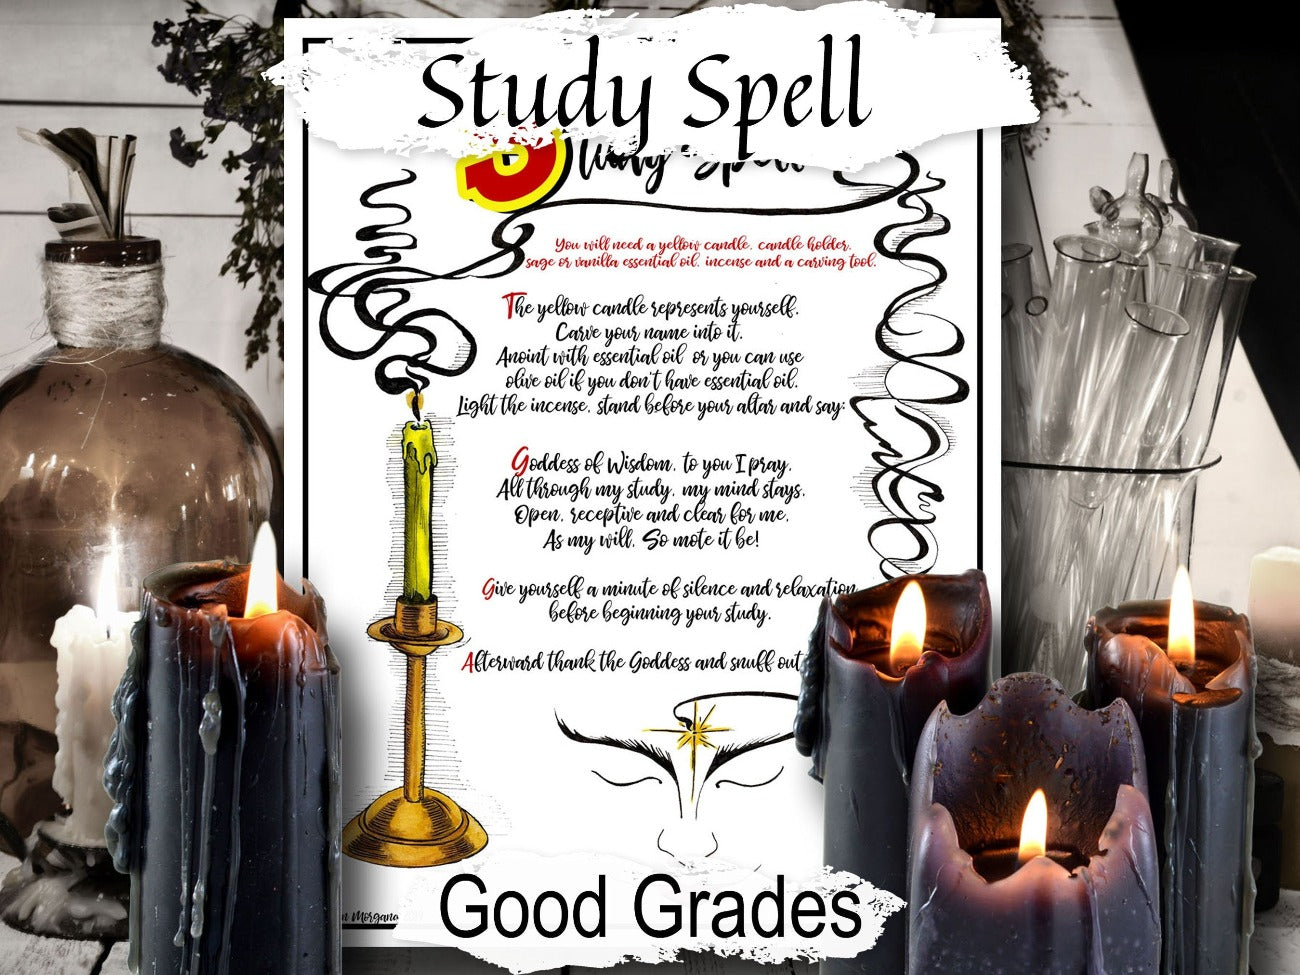 STUDY SPELL Charmed Style, Learning Spell For Good Marks, Memory Spell, Wicca Witchcraft Student Magic, Witch Book of Shadows Printable - Morgana Magick Spell